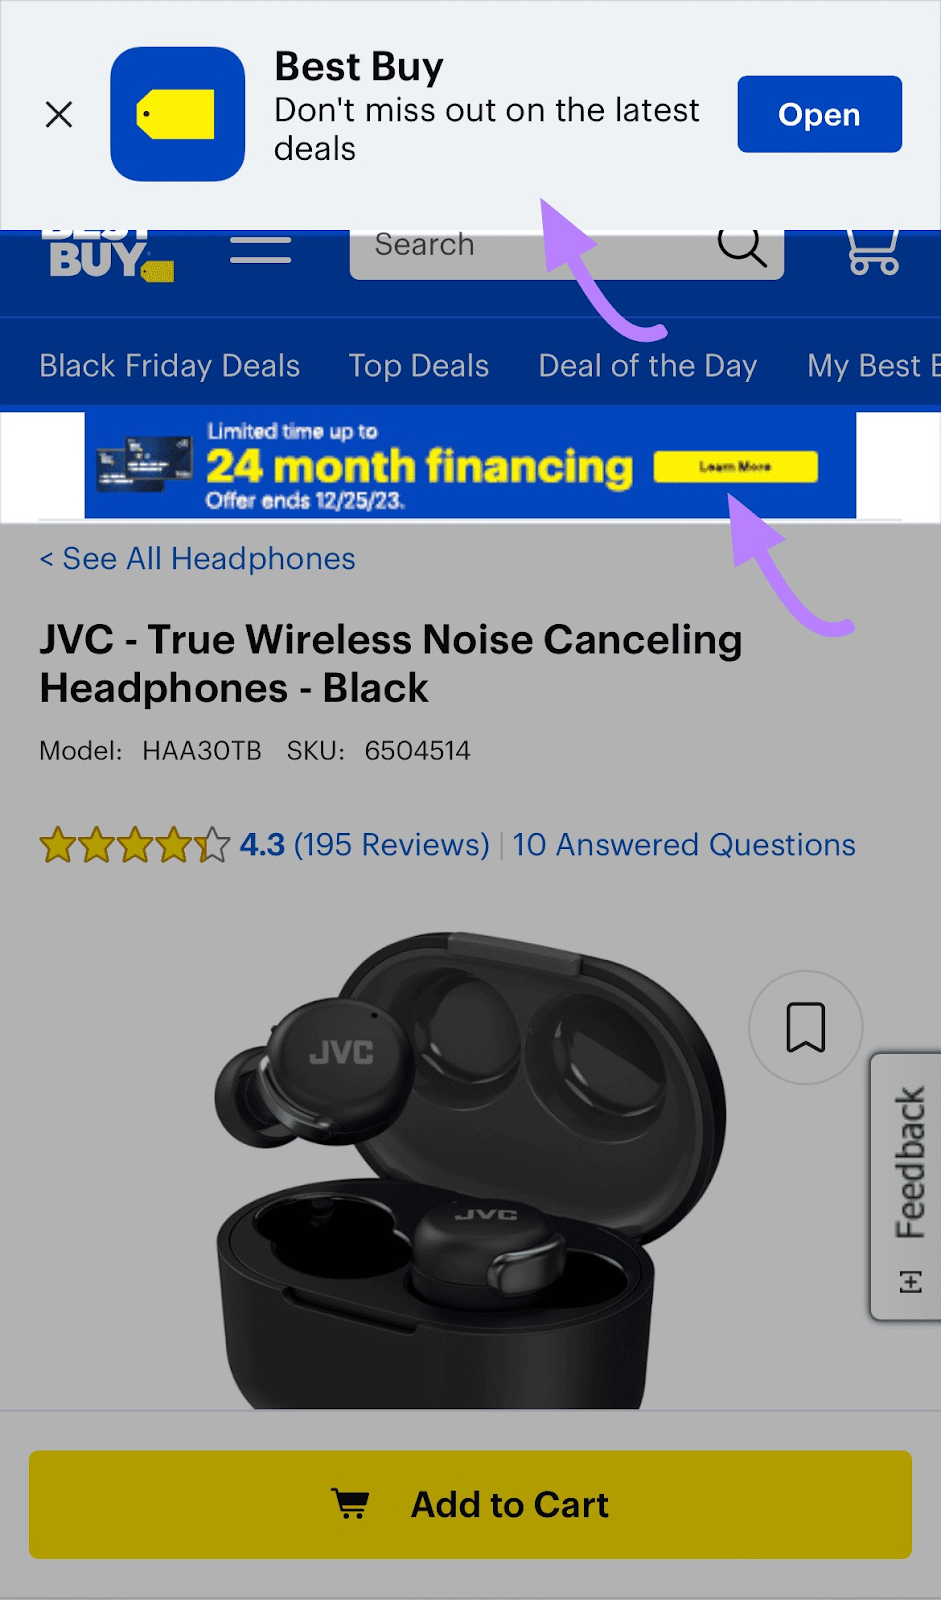 Best Buy product page for noise-canceling headphones with two mobile banner ads at the top of page